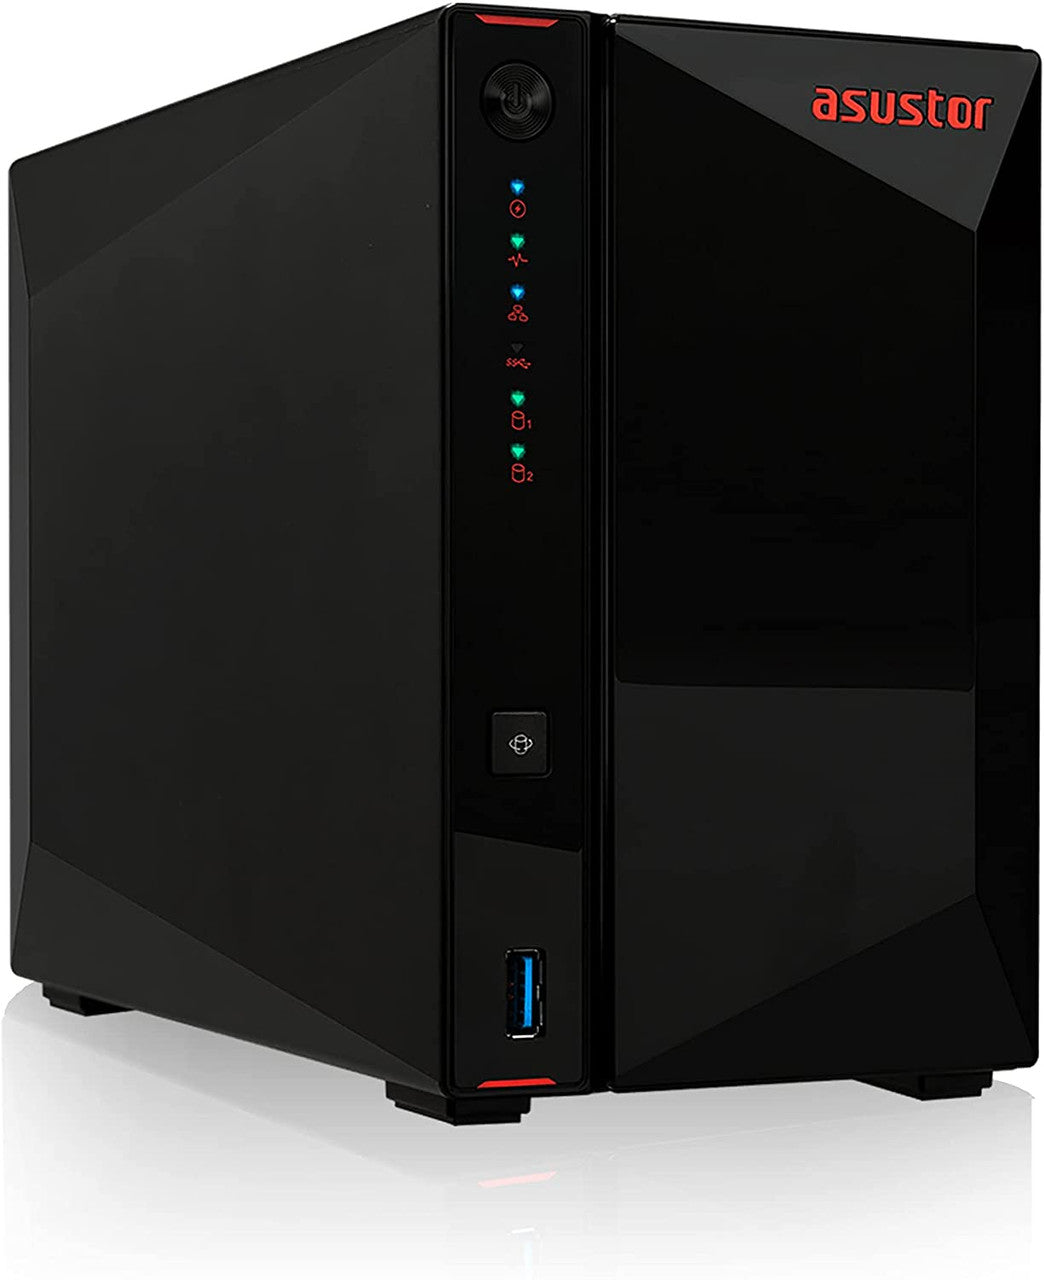 Asustor AS5202T 2-Bay Nimbustor 2 NAS with 2GB RAM and 12TB (2 x 6TB) Western Digital RED PRO Drives Fully Assembled and Tested